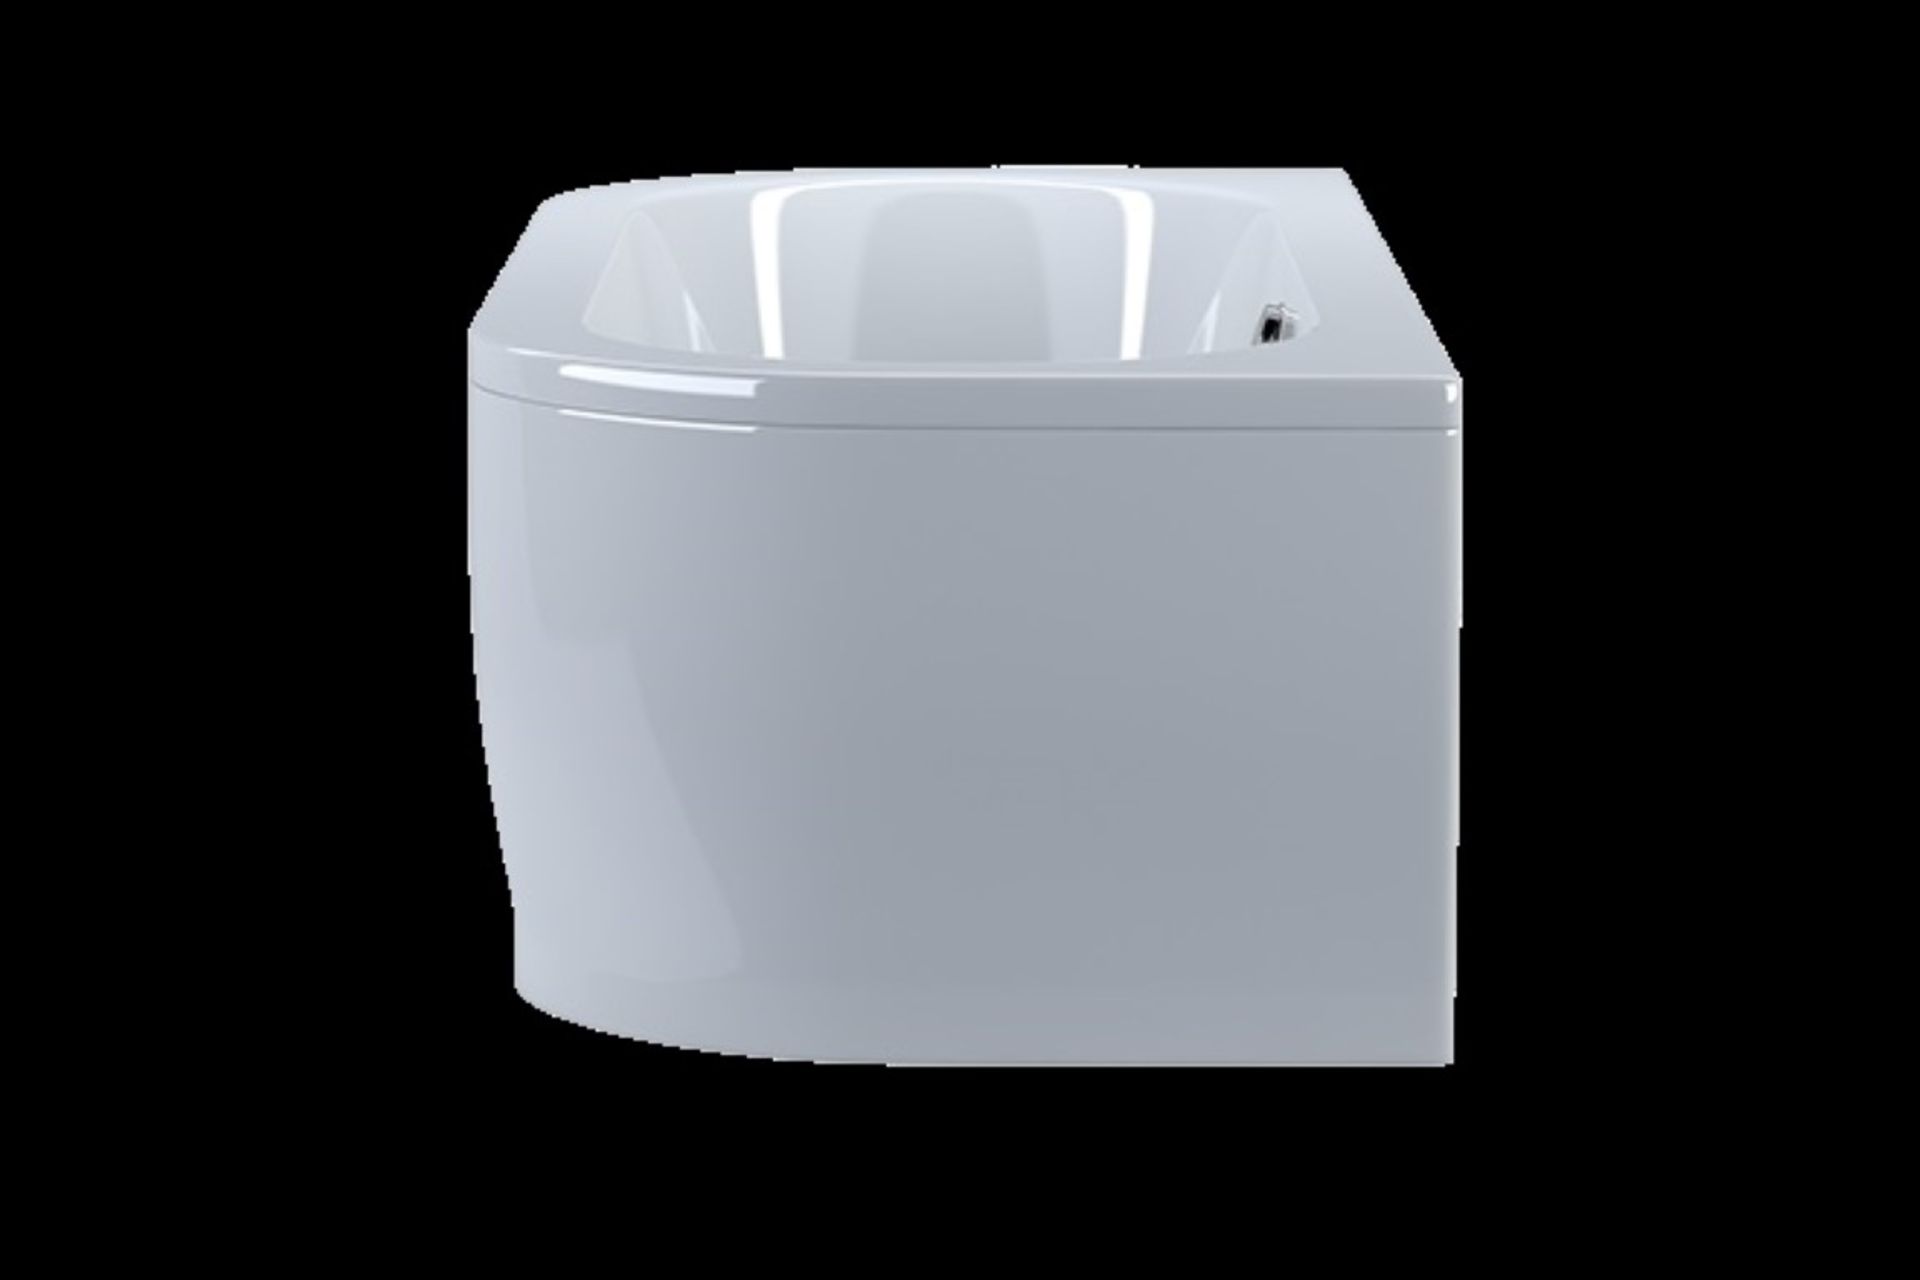 1 x Back to Wall PALLADIO D Shape Bath - Stylis Design in High Quality White Acrylic - - Image 2 of 4